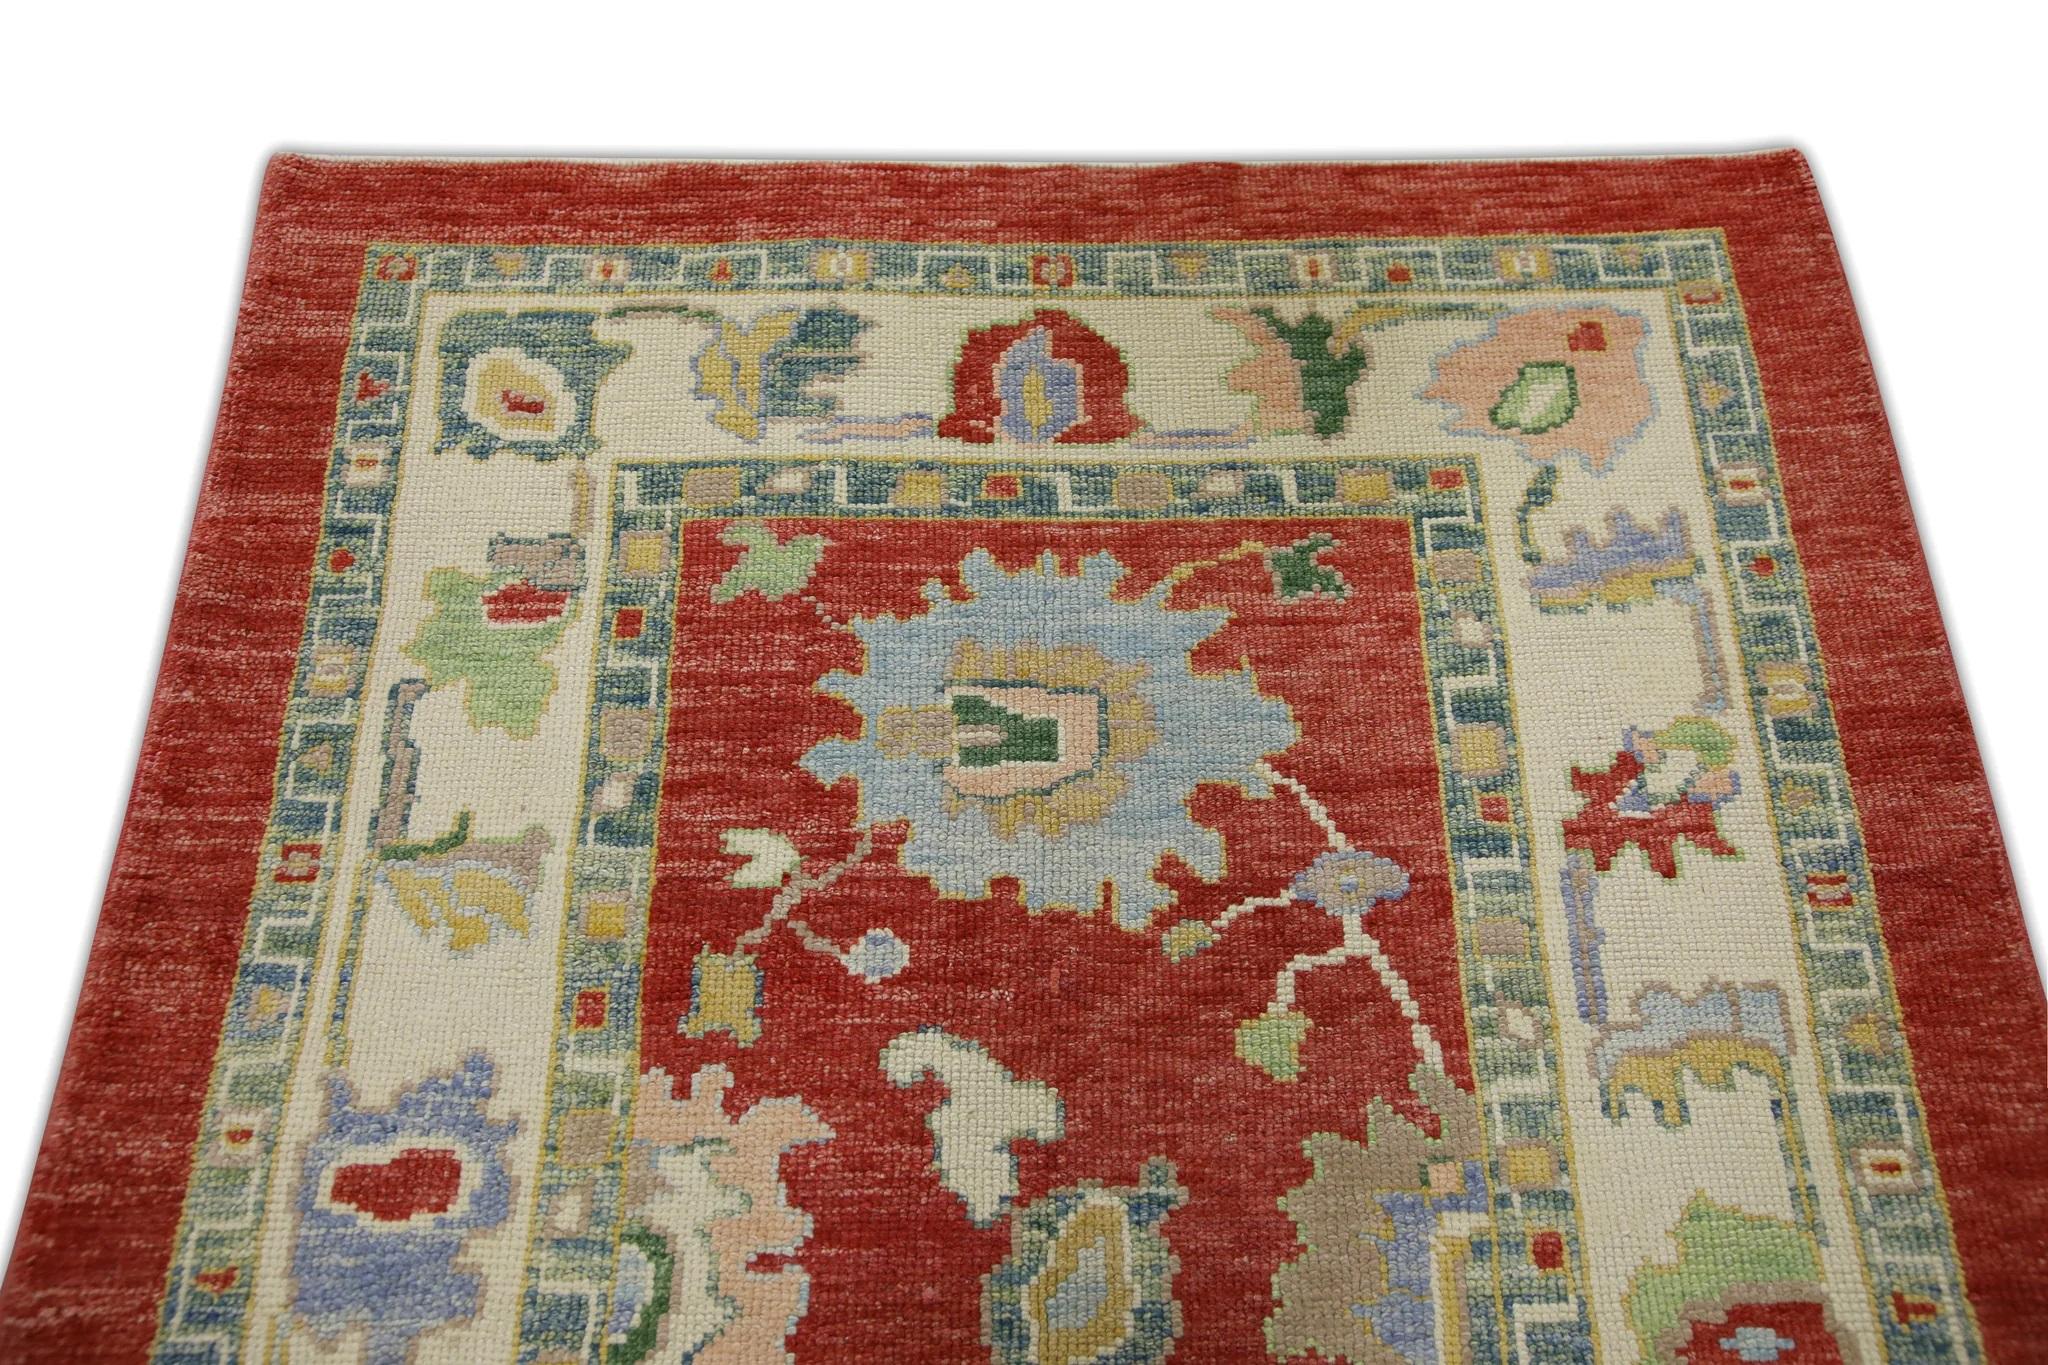 Vegetable Dyed Red Handwoven Wool Turkish Oushak Rug in Blue & Green Floral Design 4'3